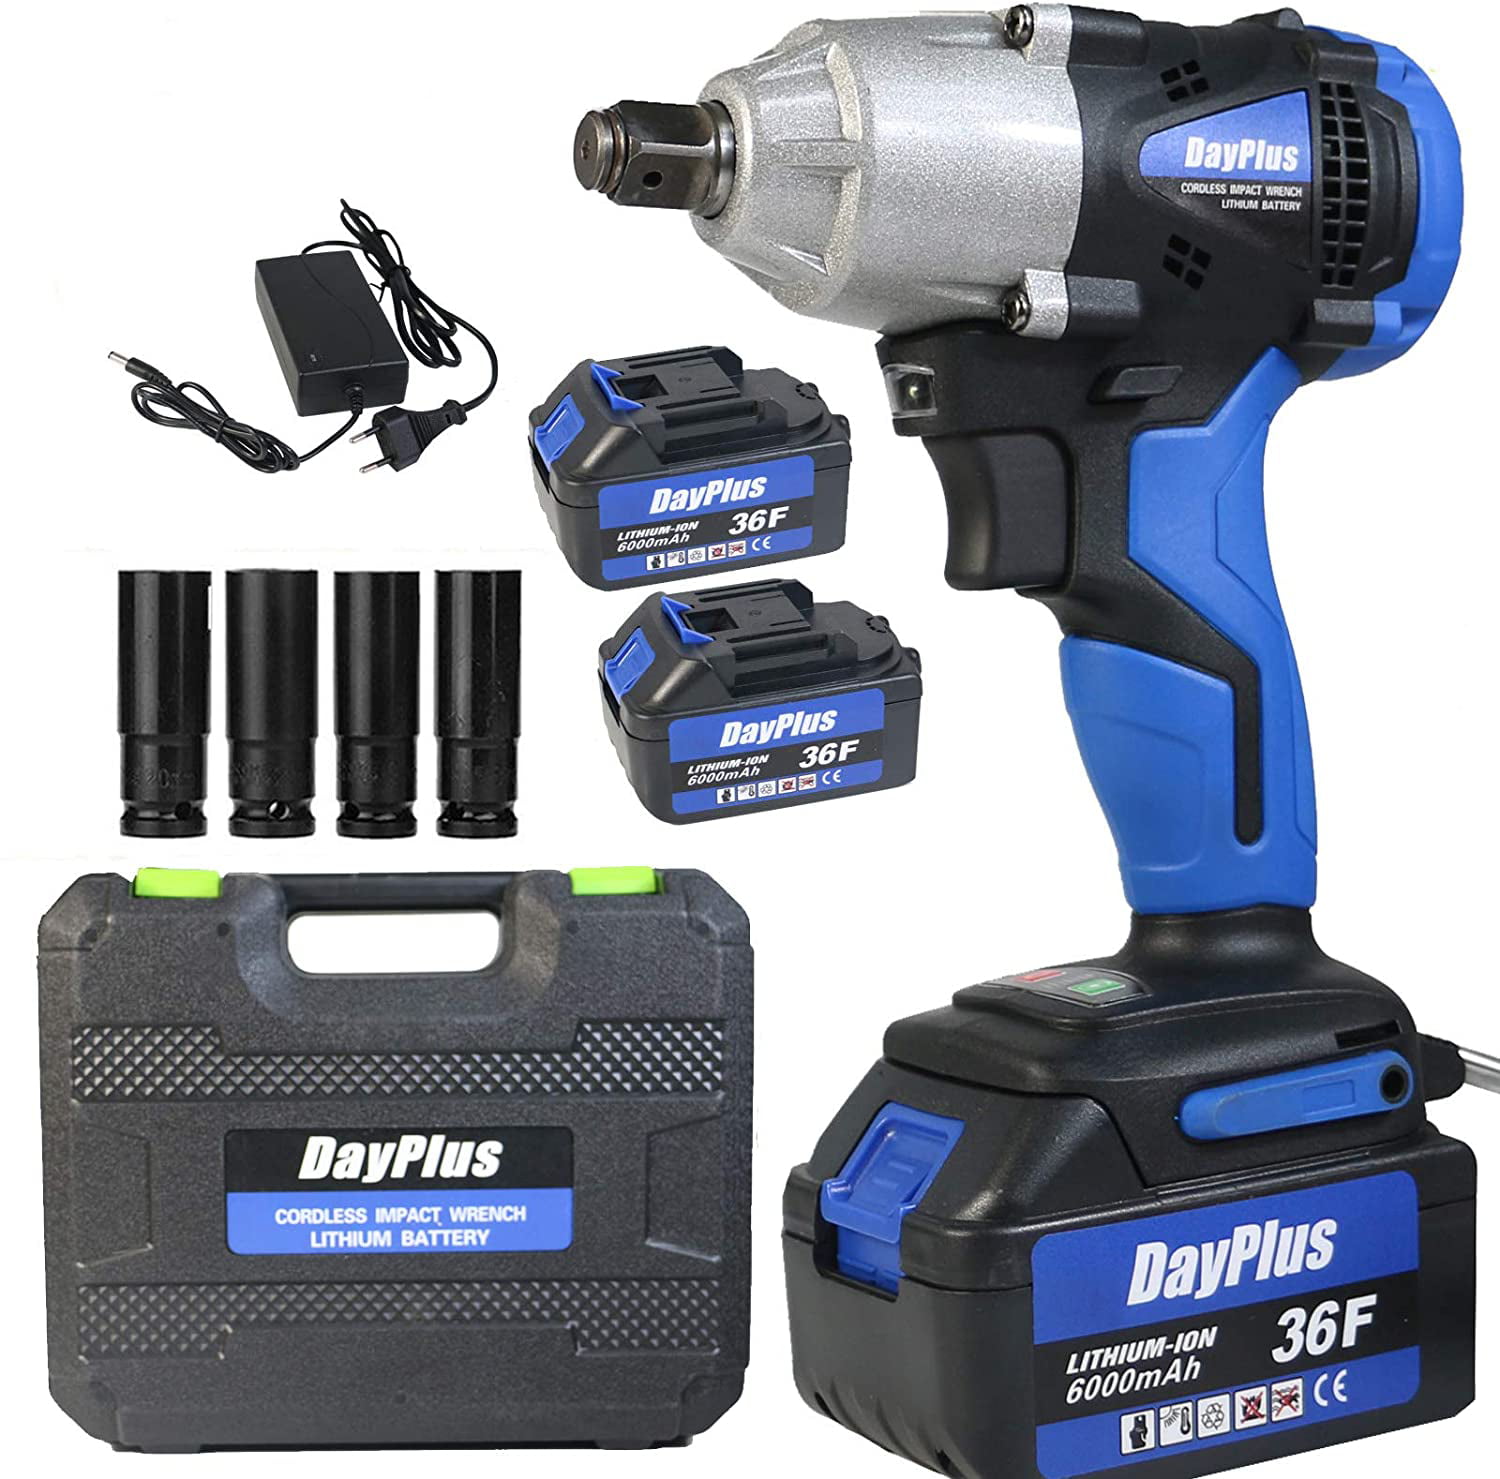 Cordless Electric Impact Ratchet Wrench 1/2" Drive and 4 Sockets 420NM Torque 